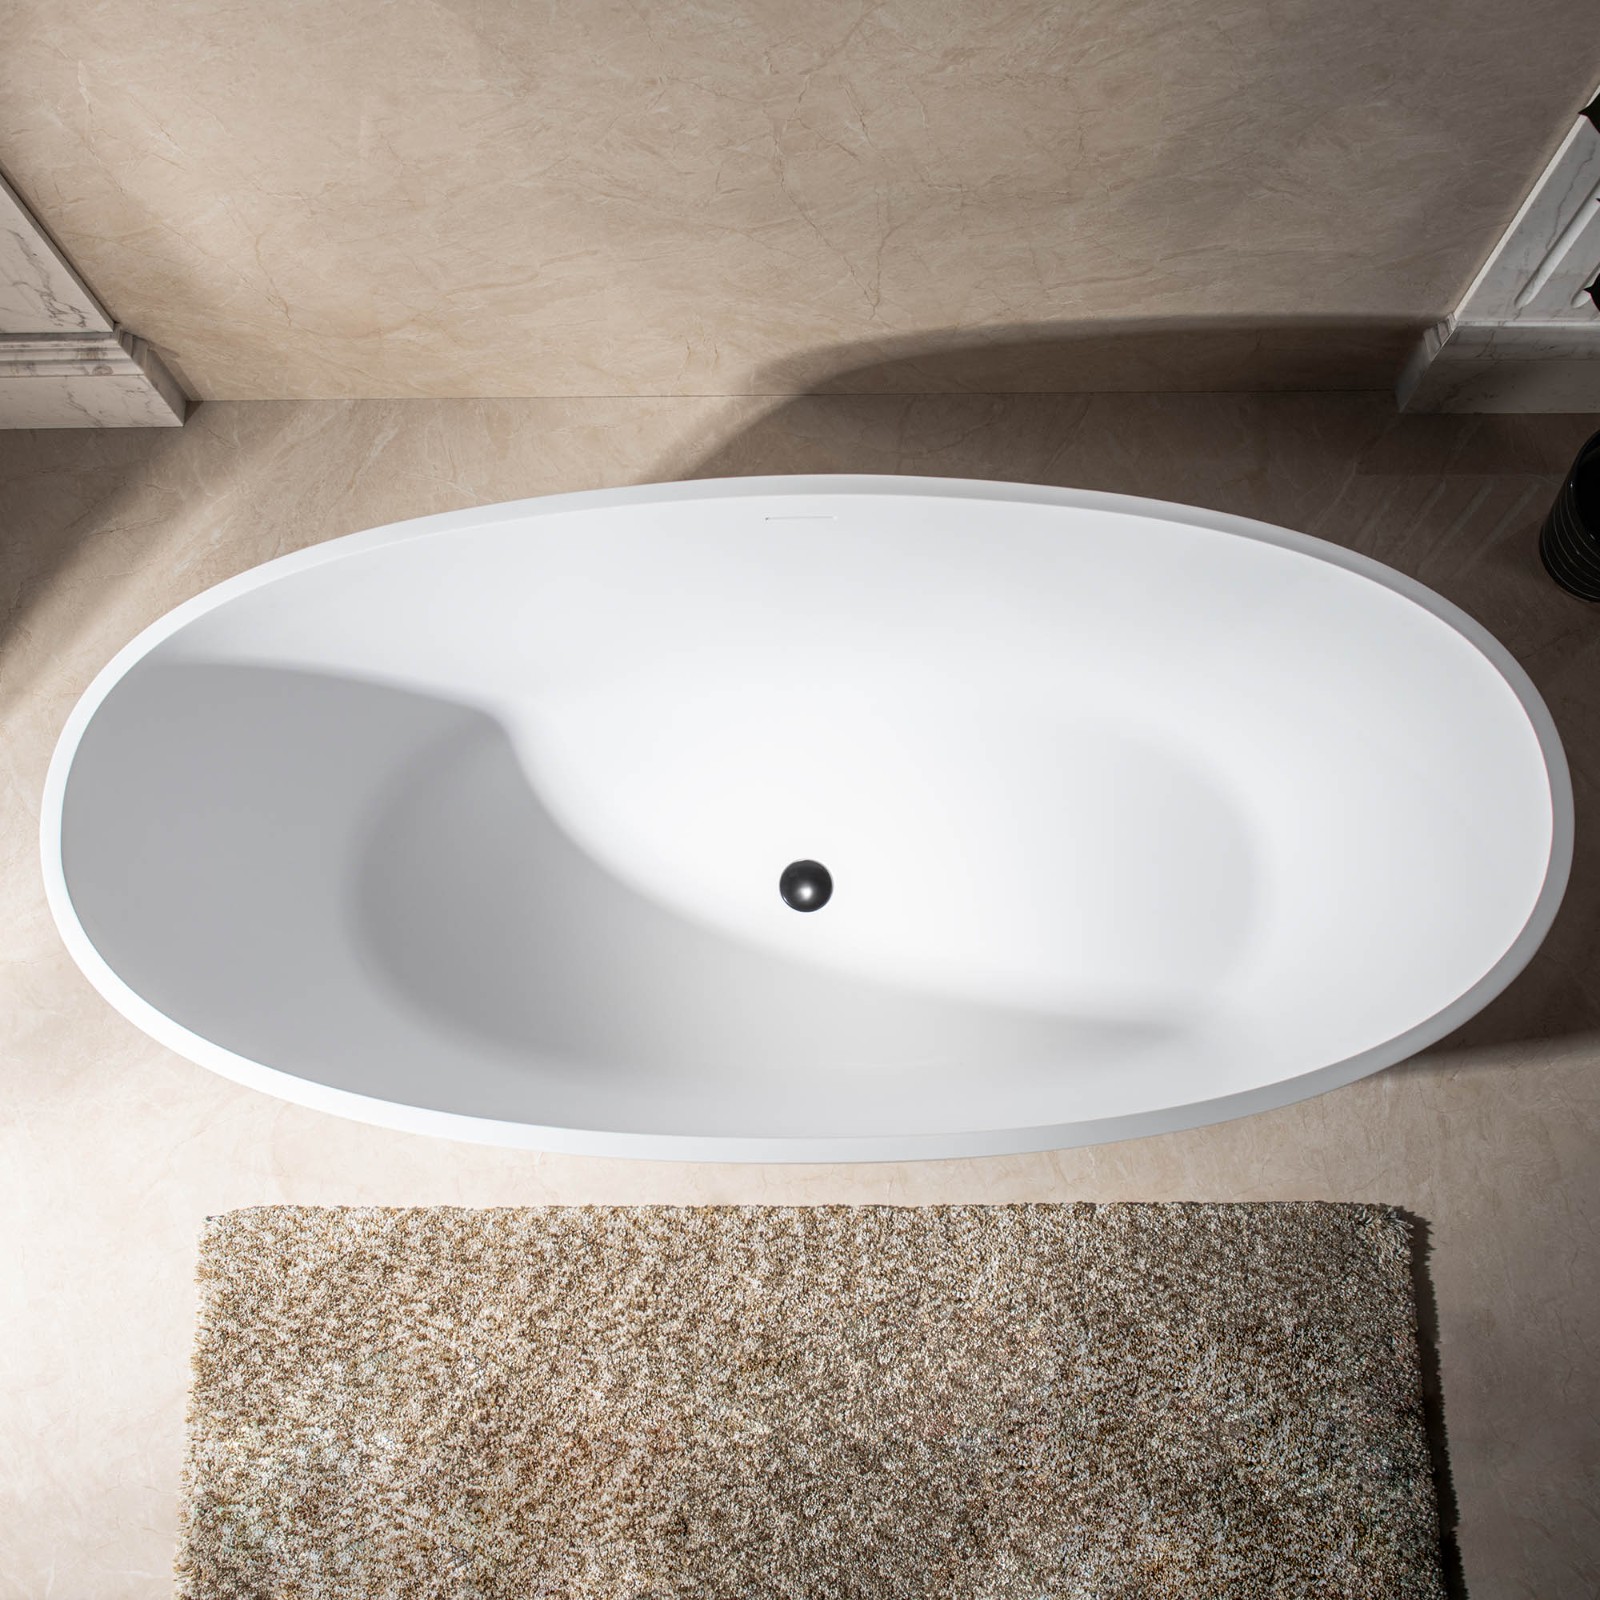  WOODBRIDGE 67 in. x 30.75 in. Luxury Contemporary Solid Surface Freestanding Bathtub in Matte White_599